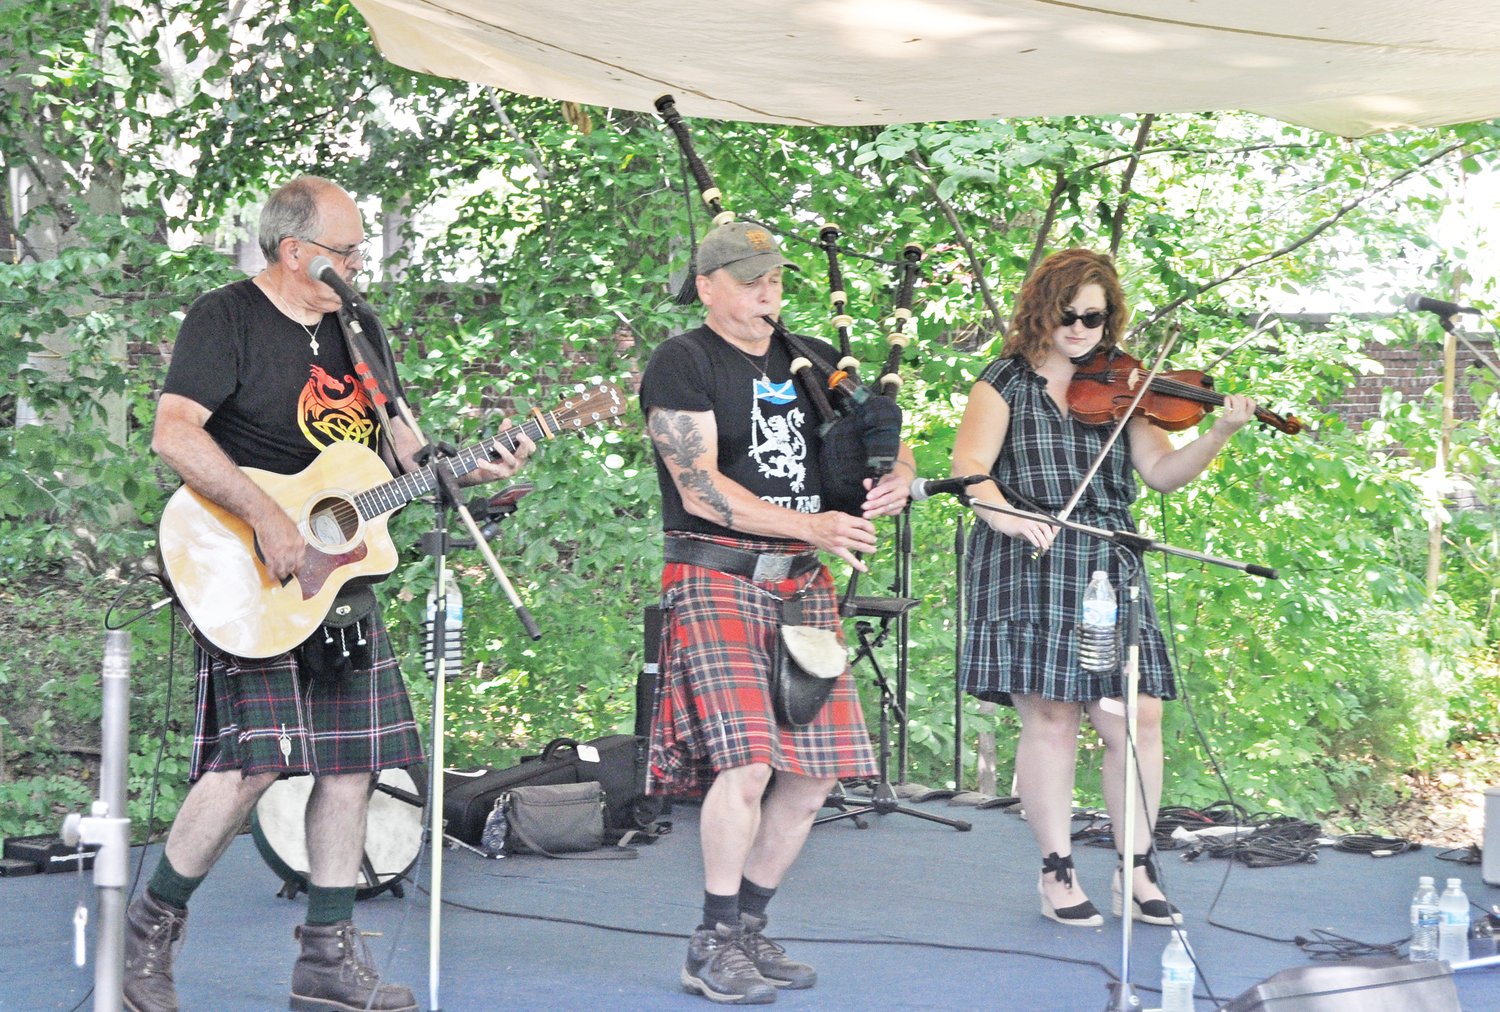 Scots American folk rock band Highland Rein performs at the Taste of Montgomery County on the grounds of the General Lew Wallace Study and Museum on Saturday.